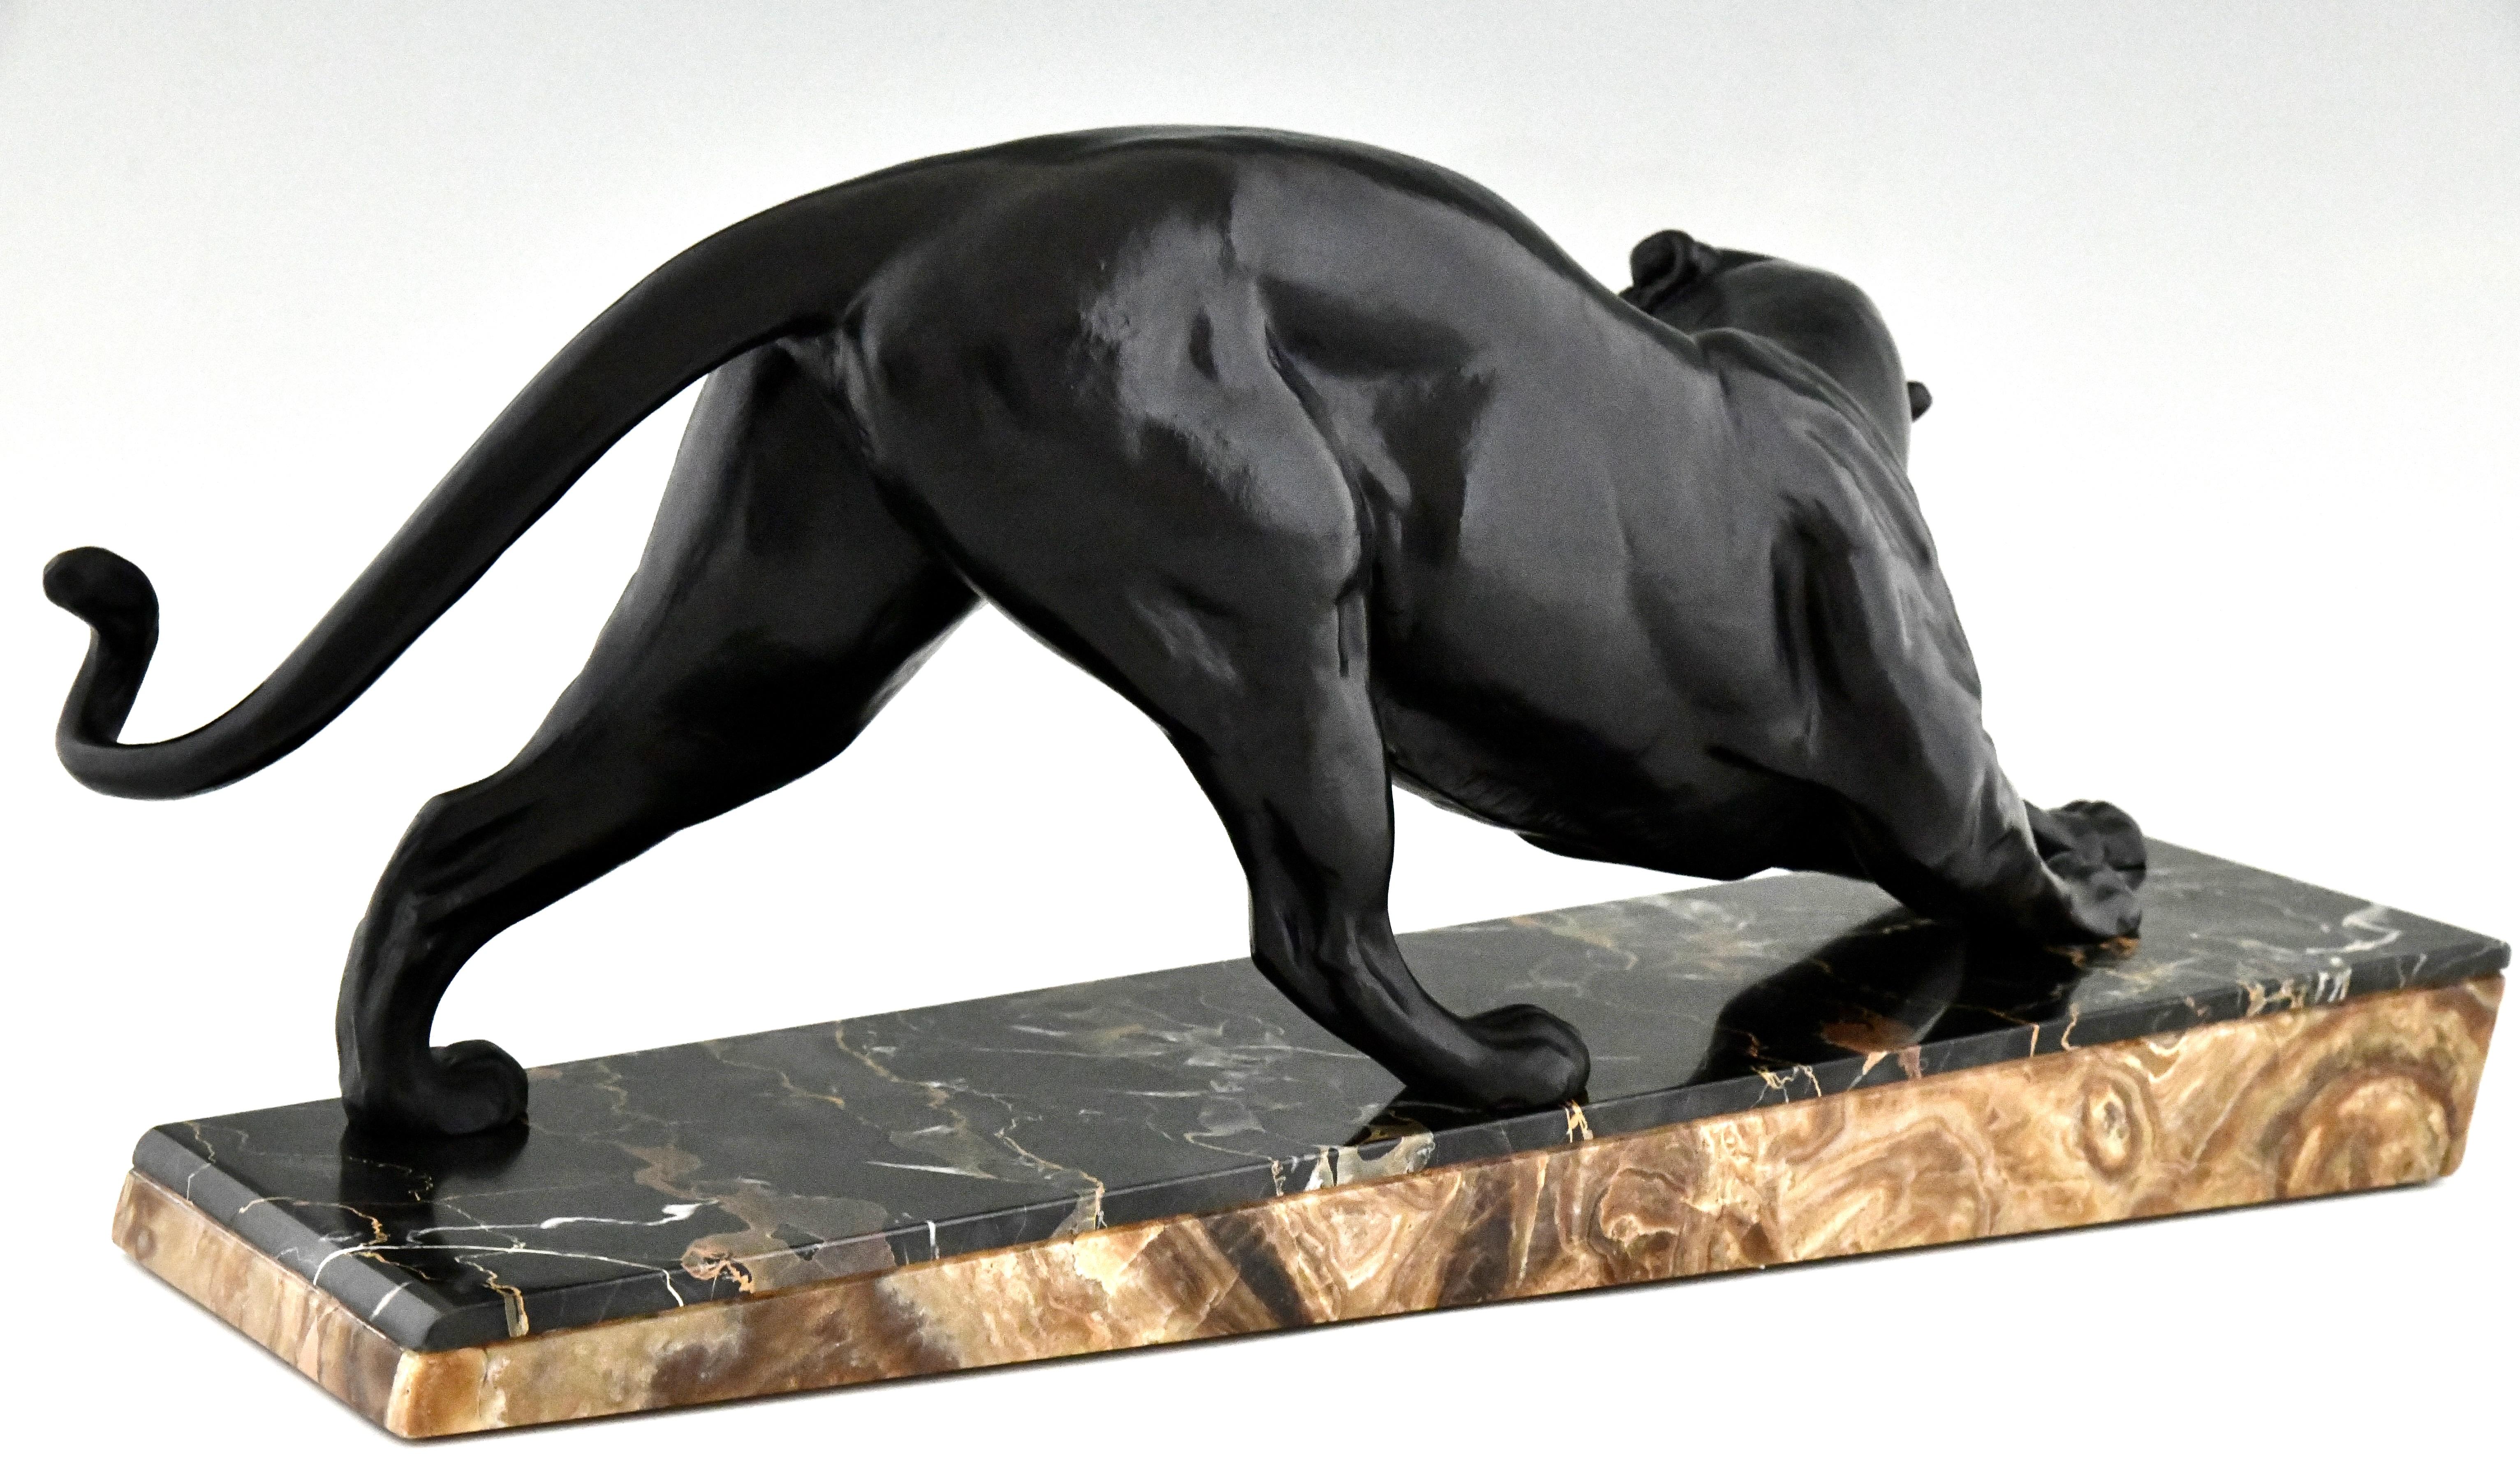 French Art Deco panther sculpture by Plagnet, France 1930.